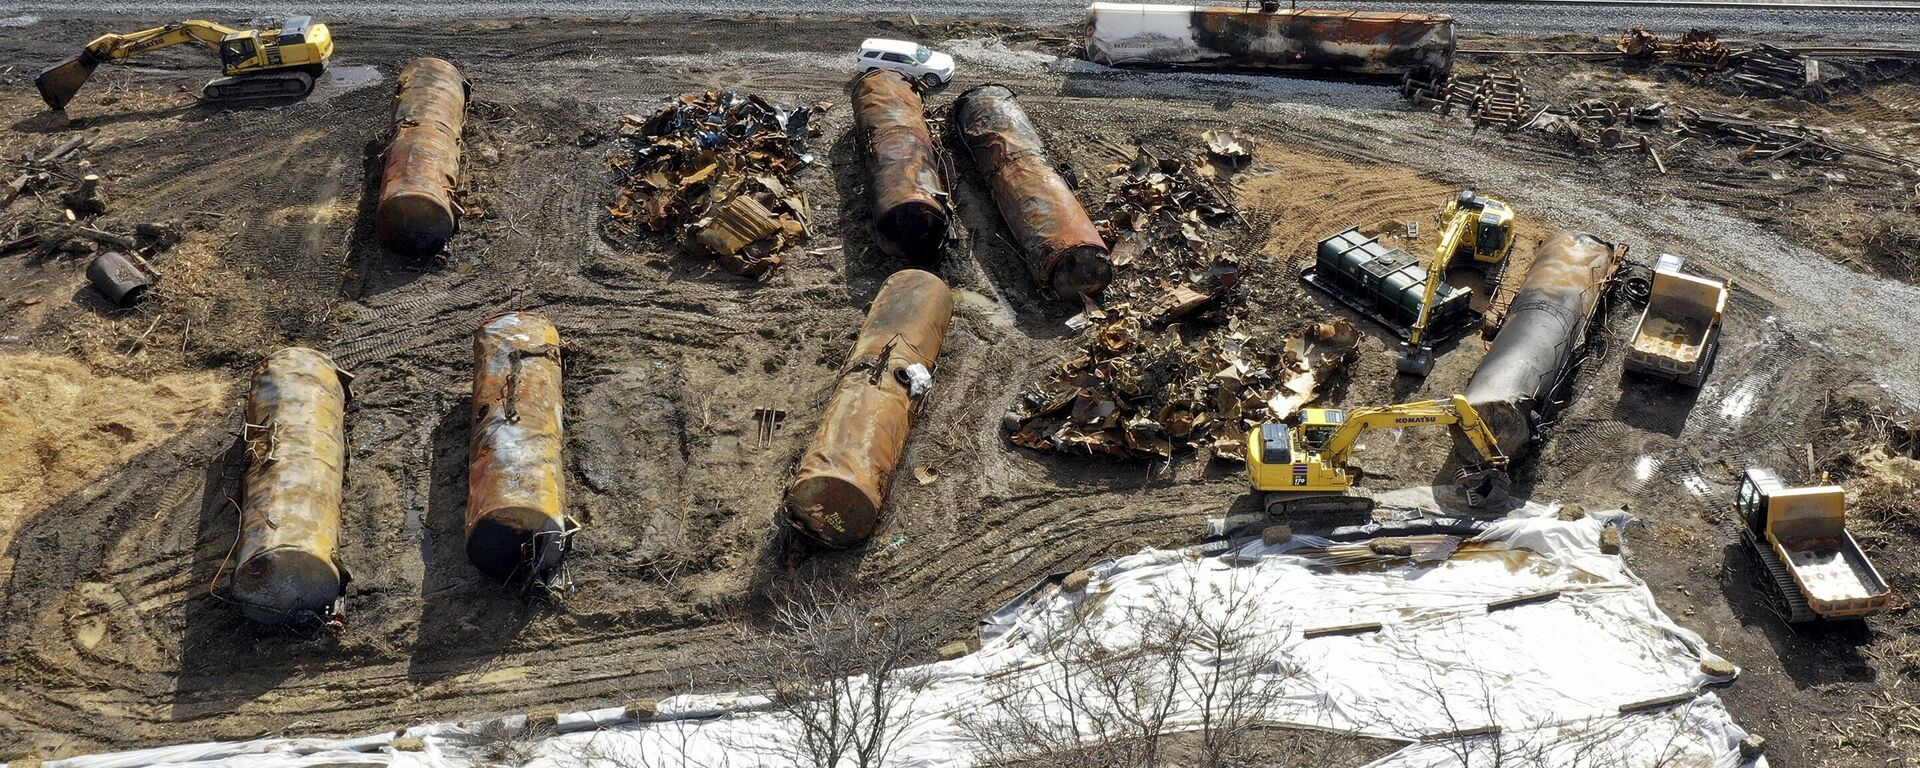 A view of the scene Friday, Feb. 24, 2023, as the cleanup continues at the site of of a Norfolk Southern freight train derailment that happened on Feb. 3 in East Palestine, Ohio - Sputnik International, 1920, 03.03.2023